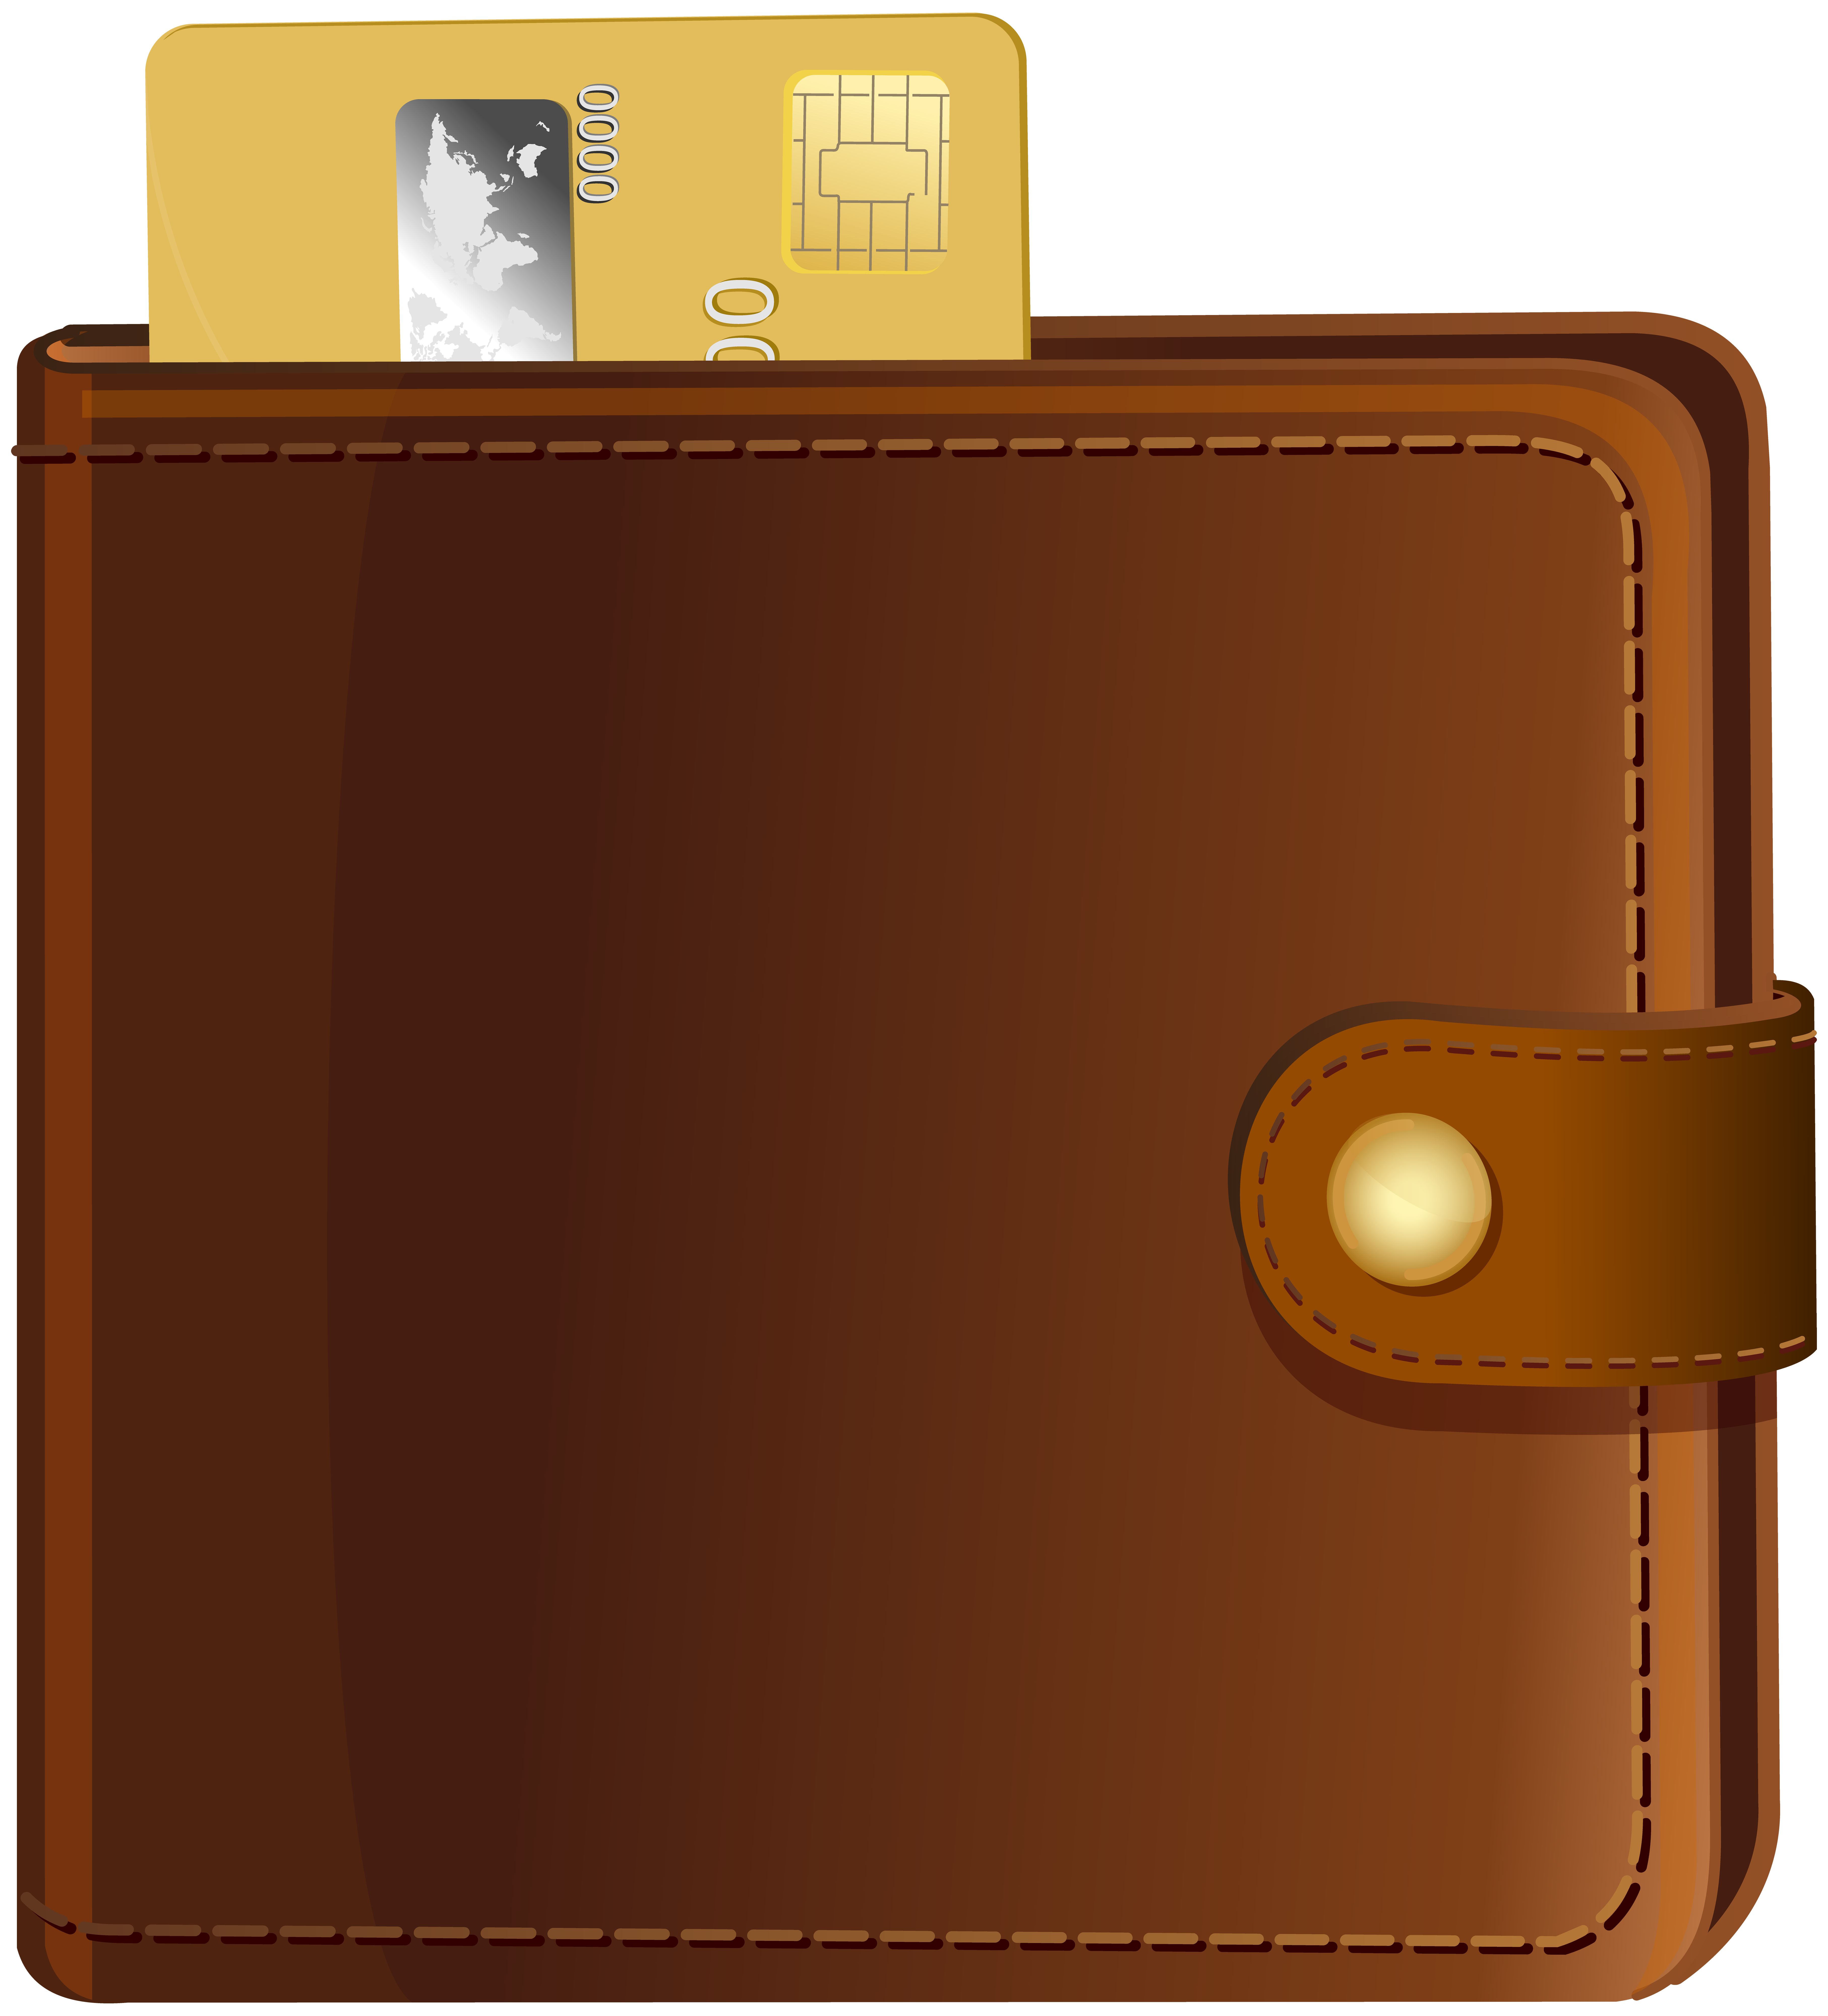 Wallet with Credit Card Transparent PNG Clip Art.